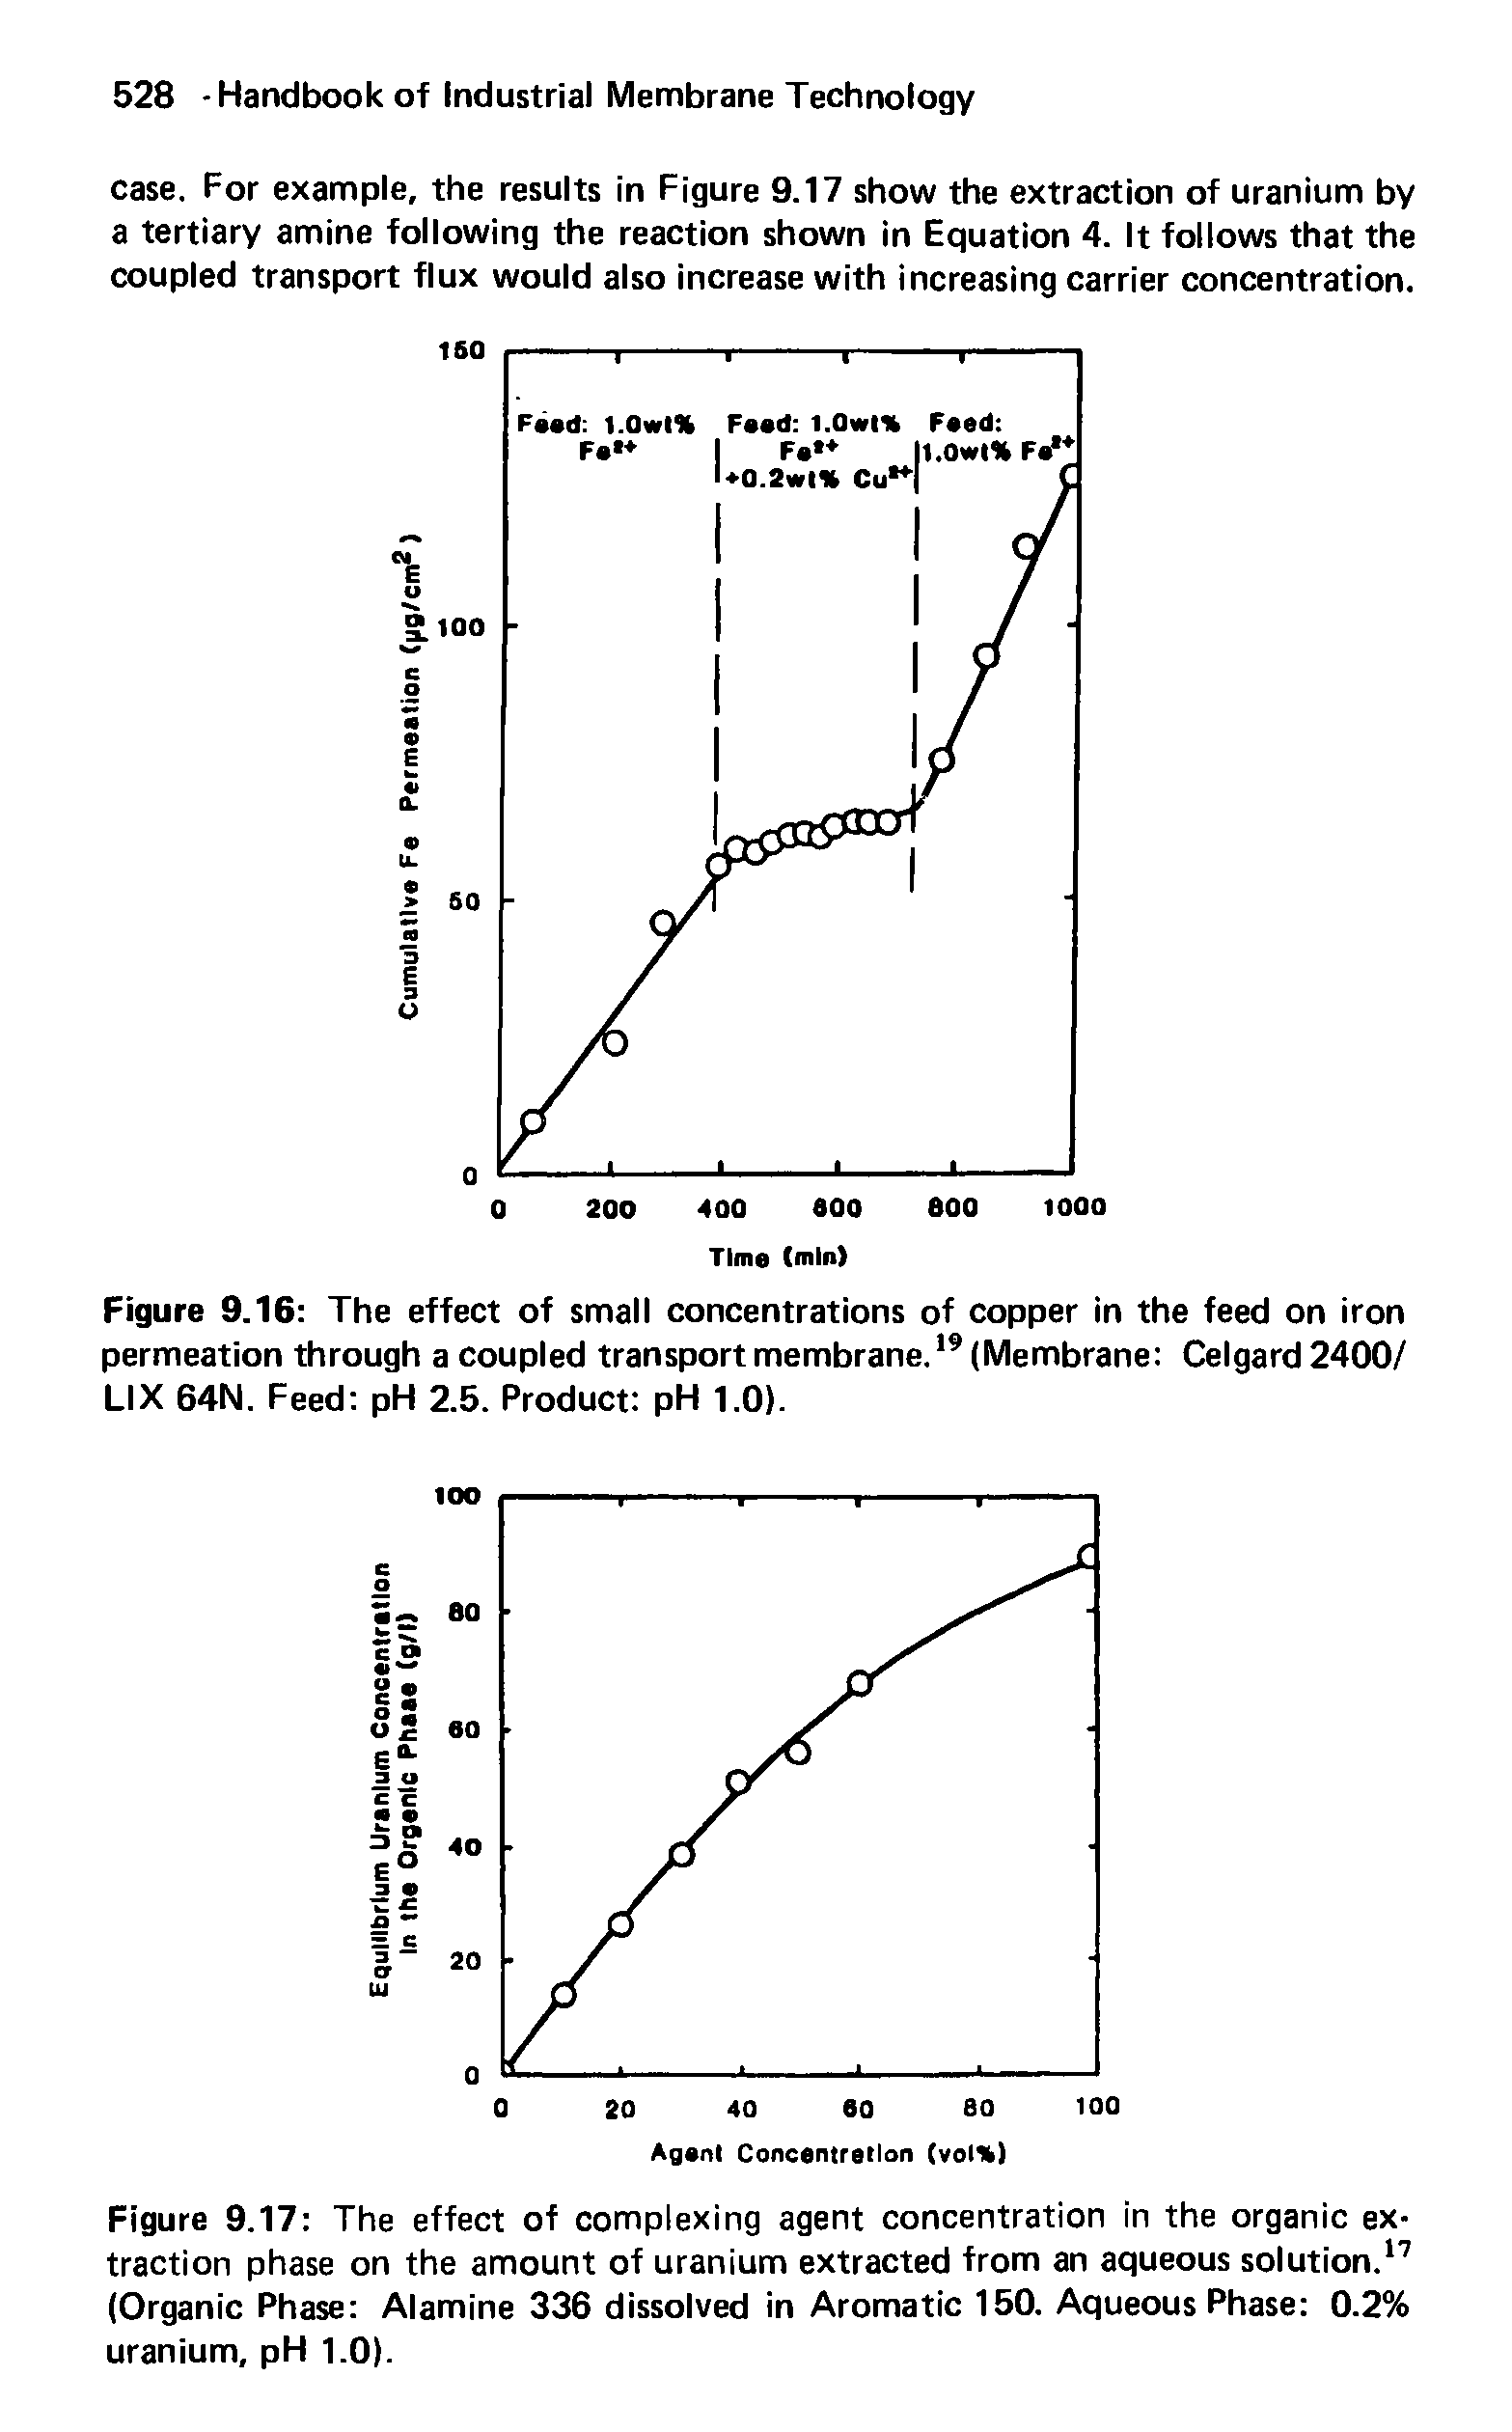 Figure 9.16 The effect of small concentrations of copper in the feed on iron permeation through a coupled transport membrane.19 (Membrane Celgard2400/ LIX 64N. Feed pH 2.5. Product pH 1.0).